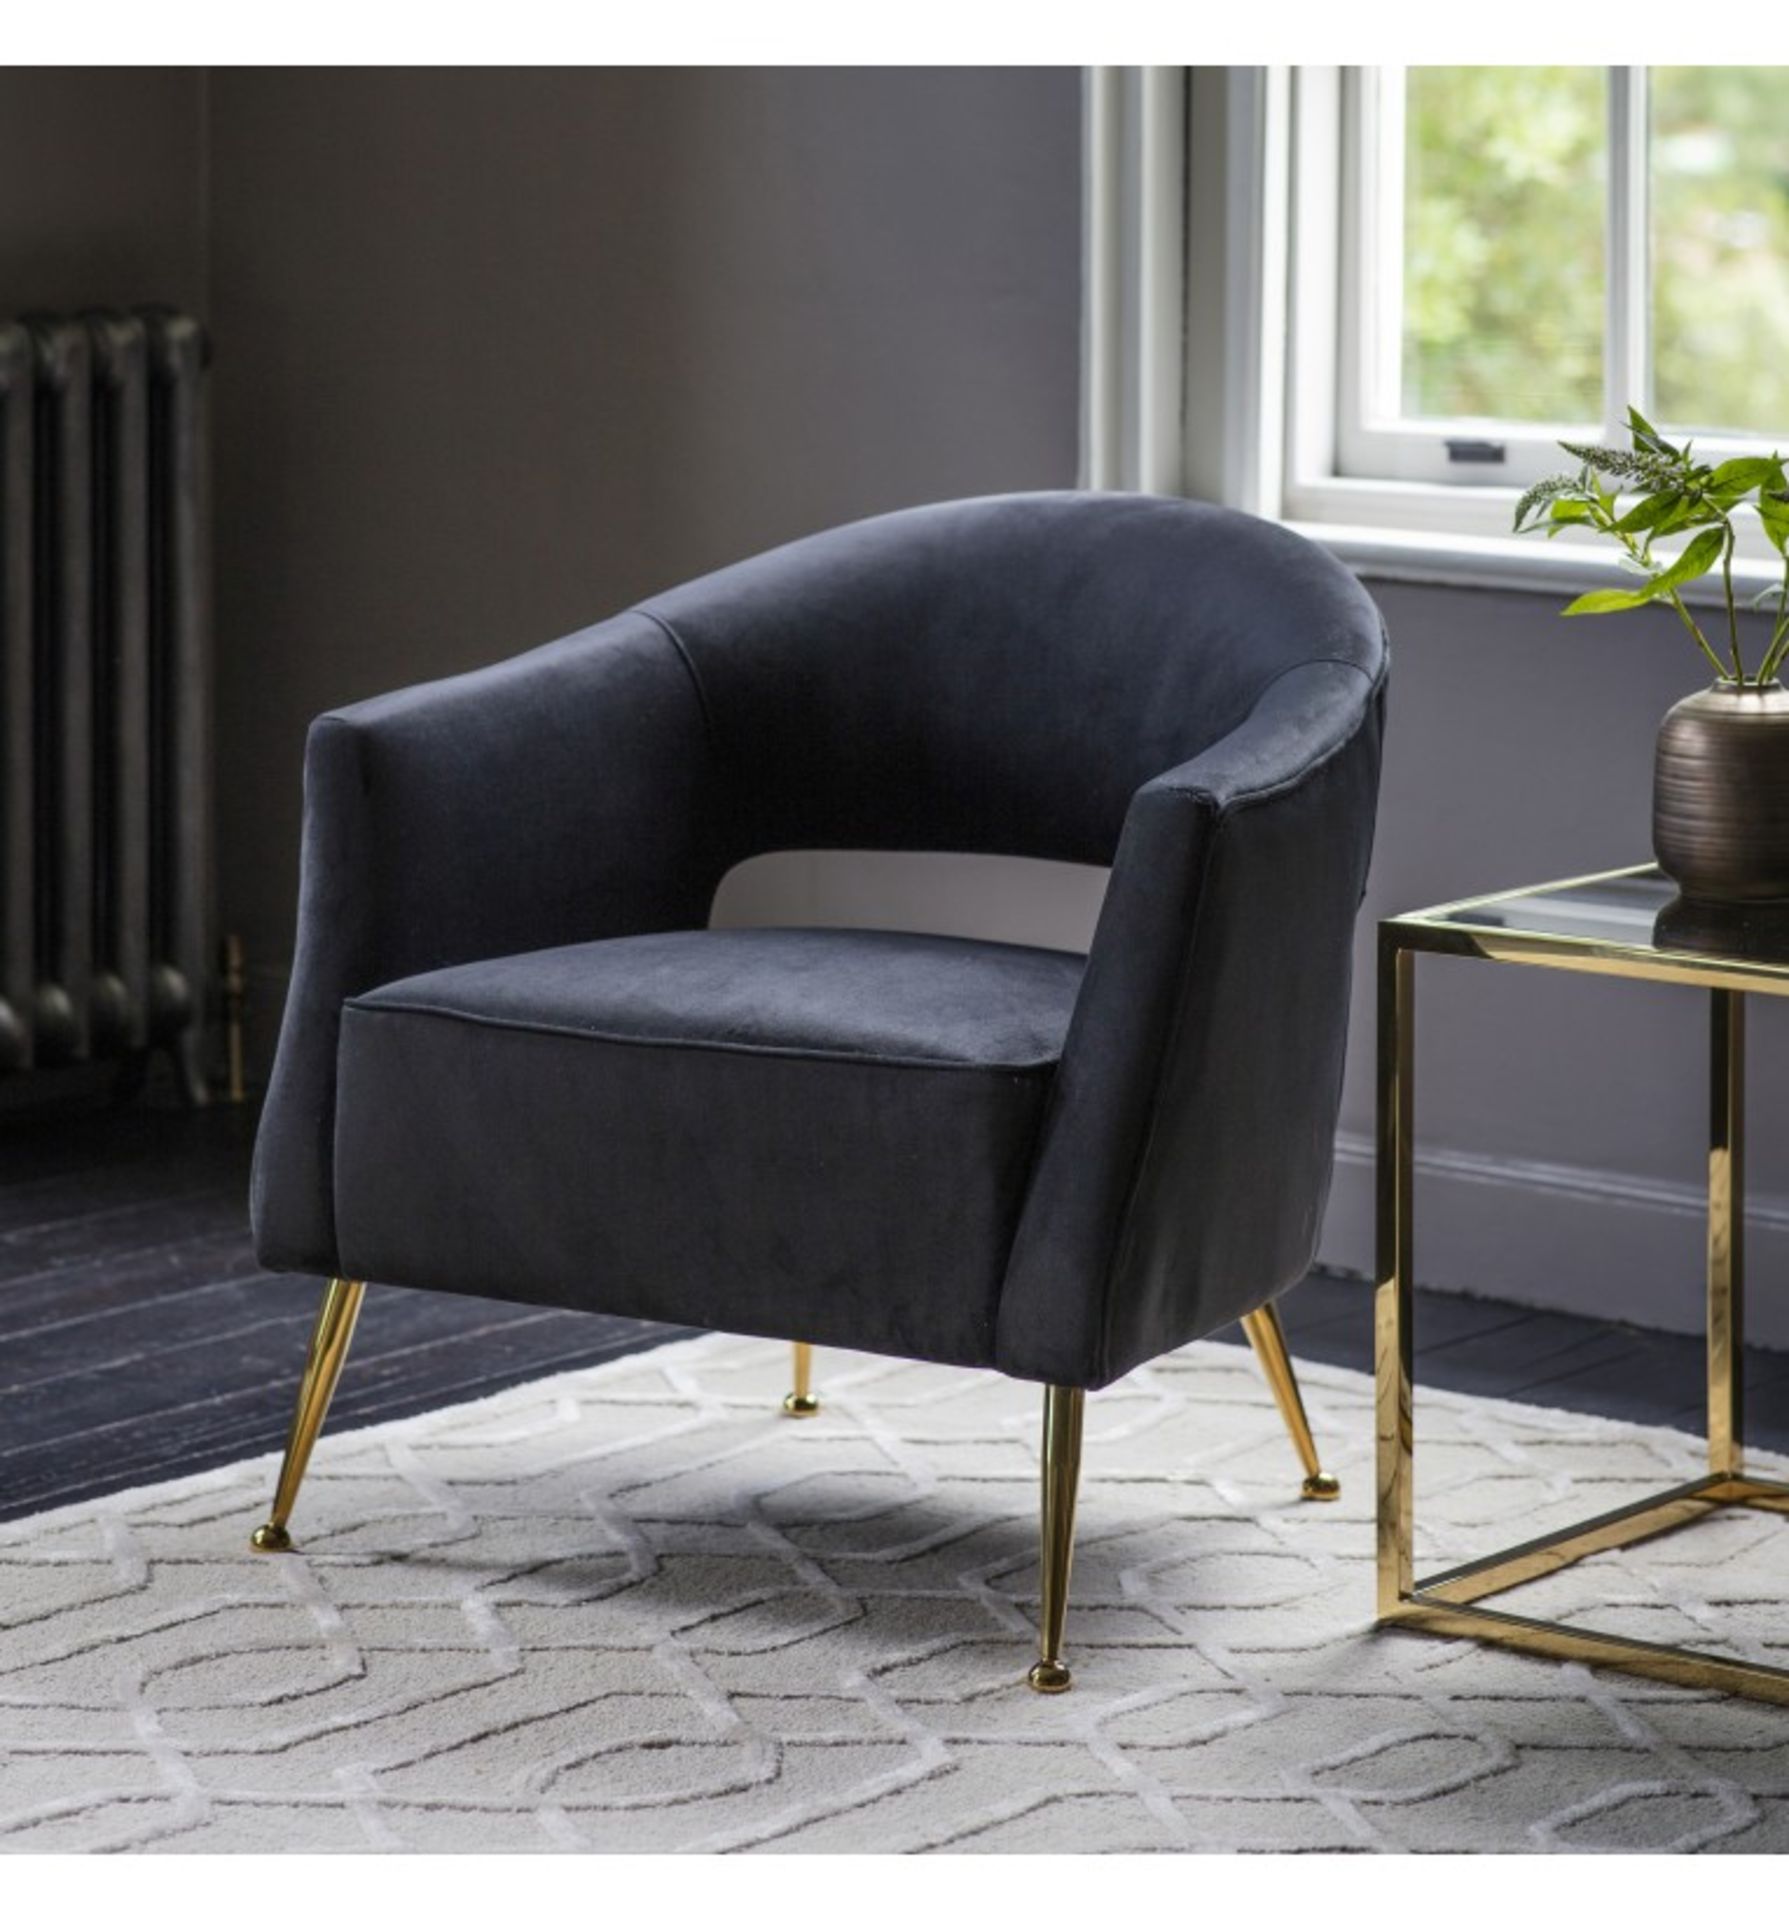 Barletta Armchair Black Velvet A Luxurious and contemporary arm chair perfect for adding style and